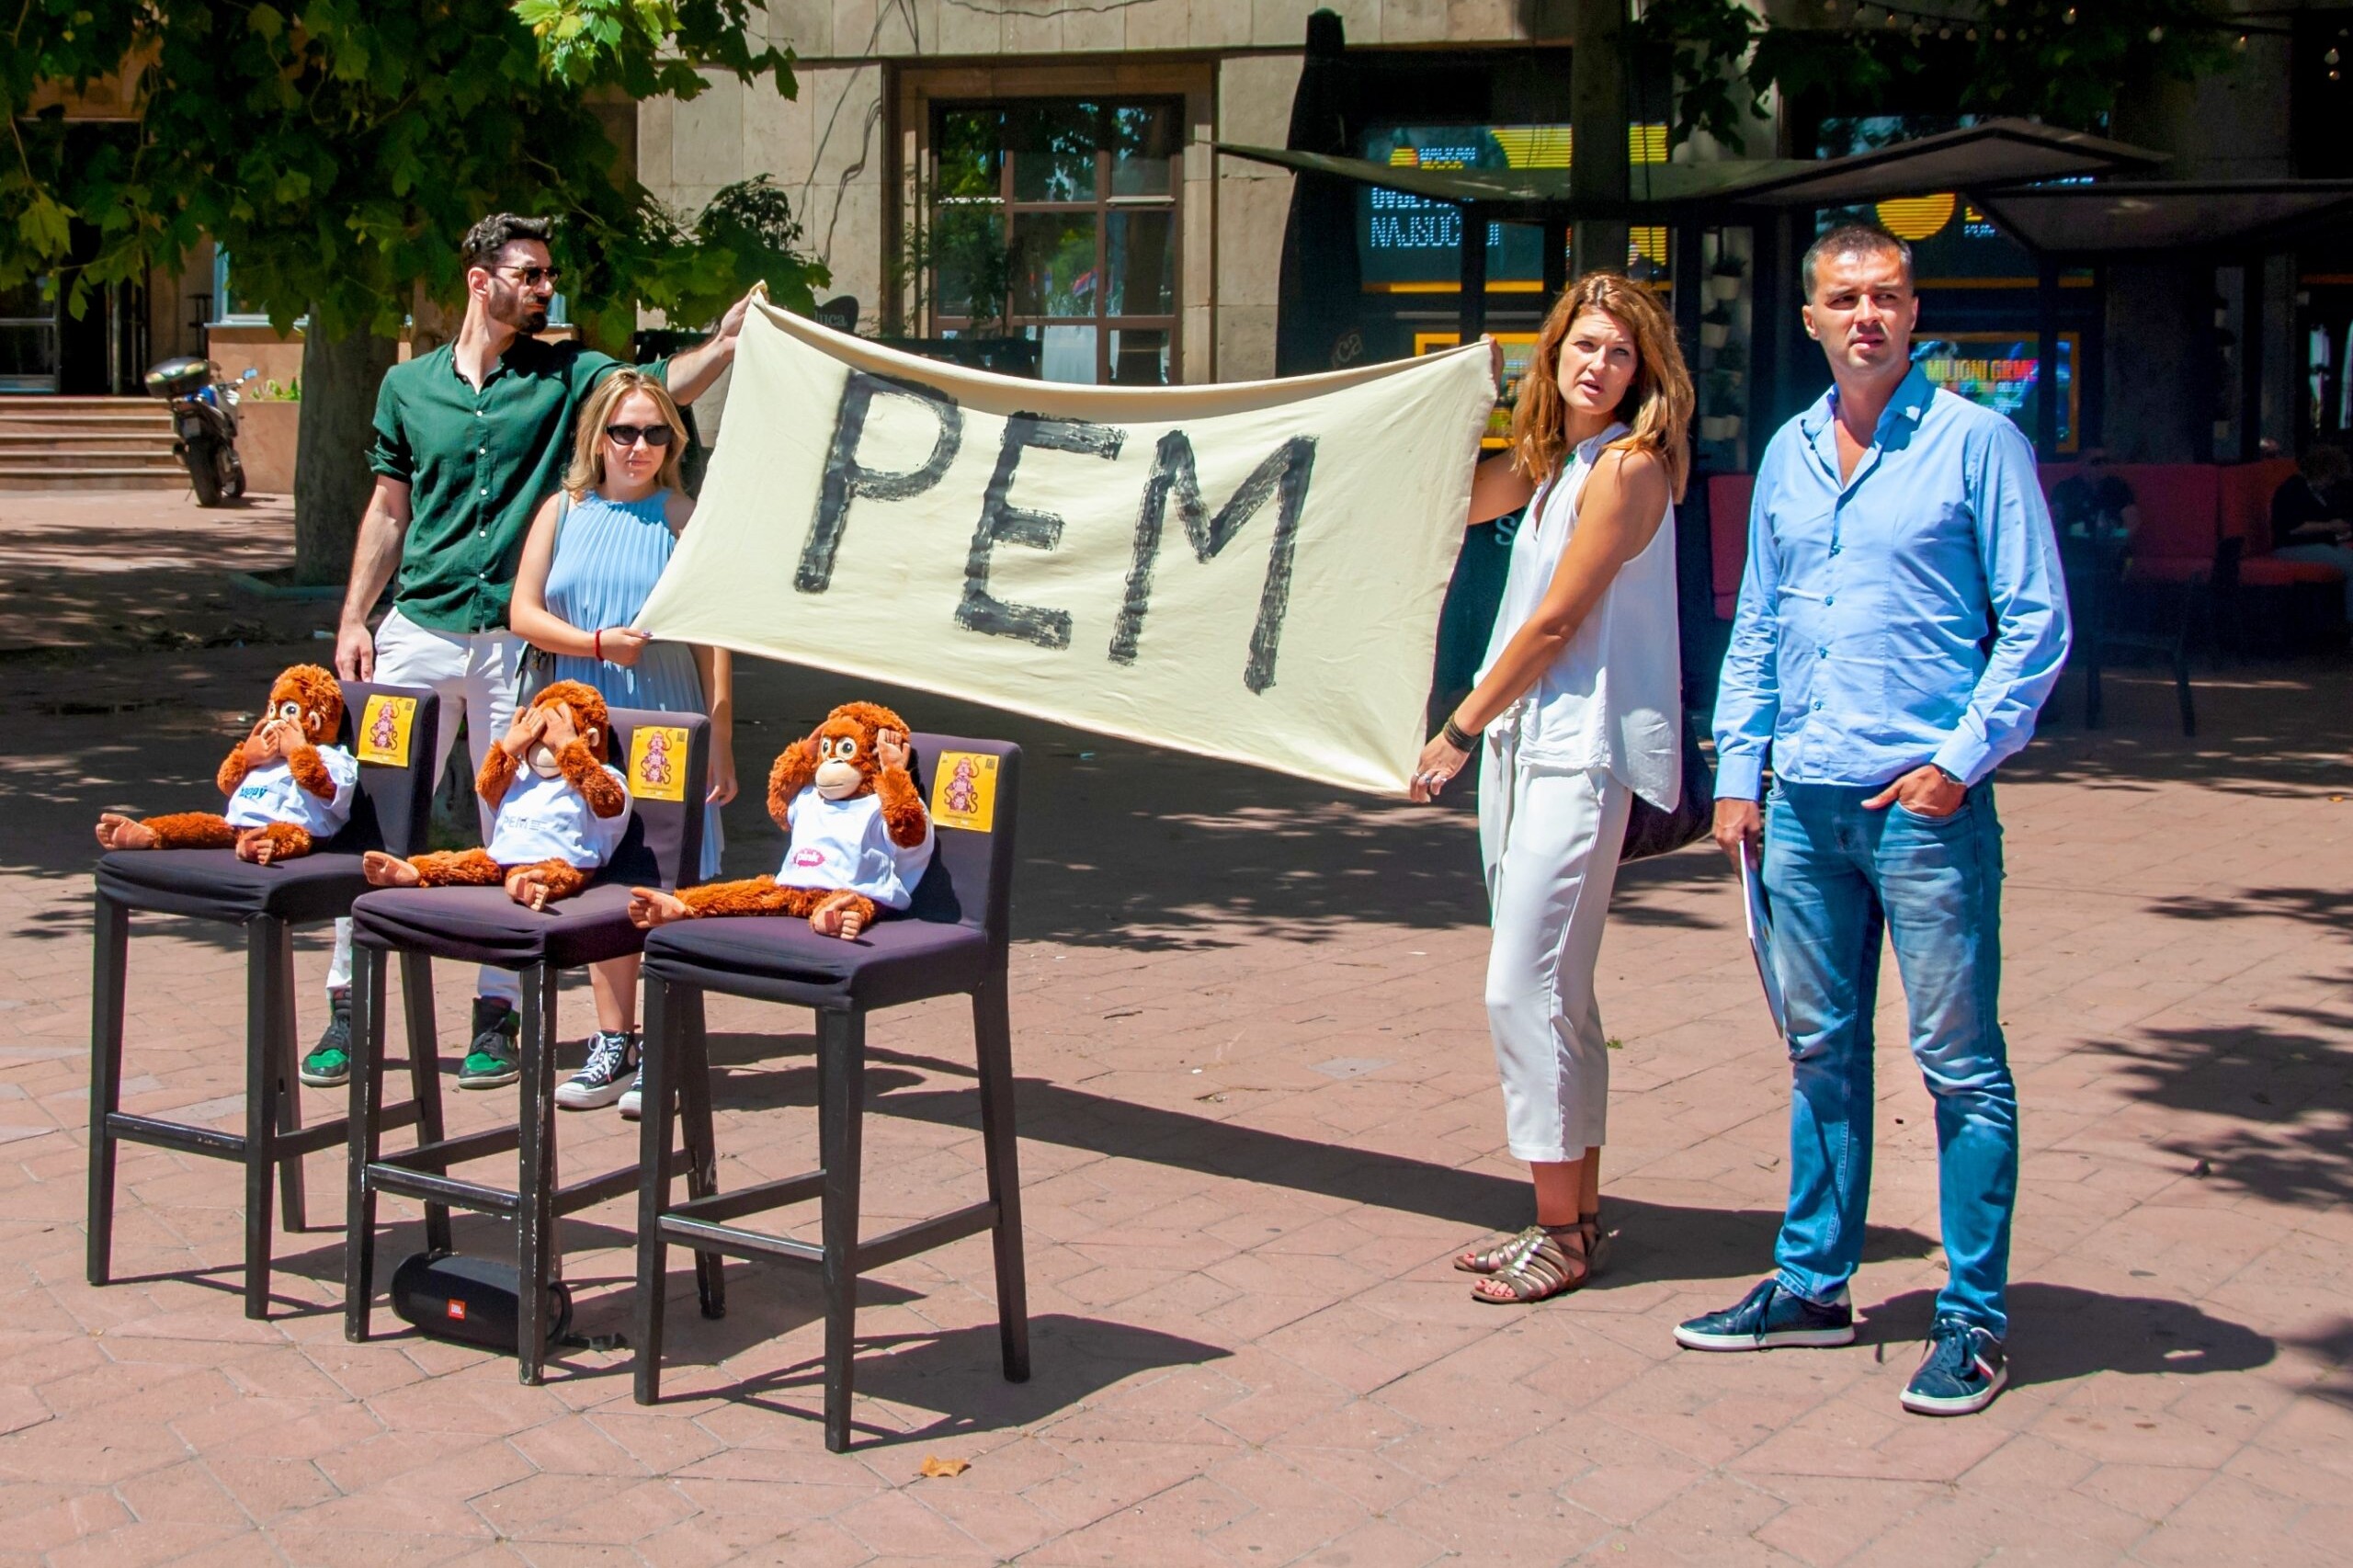 Protesters against REM in Belgrade, Serbia